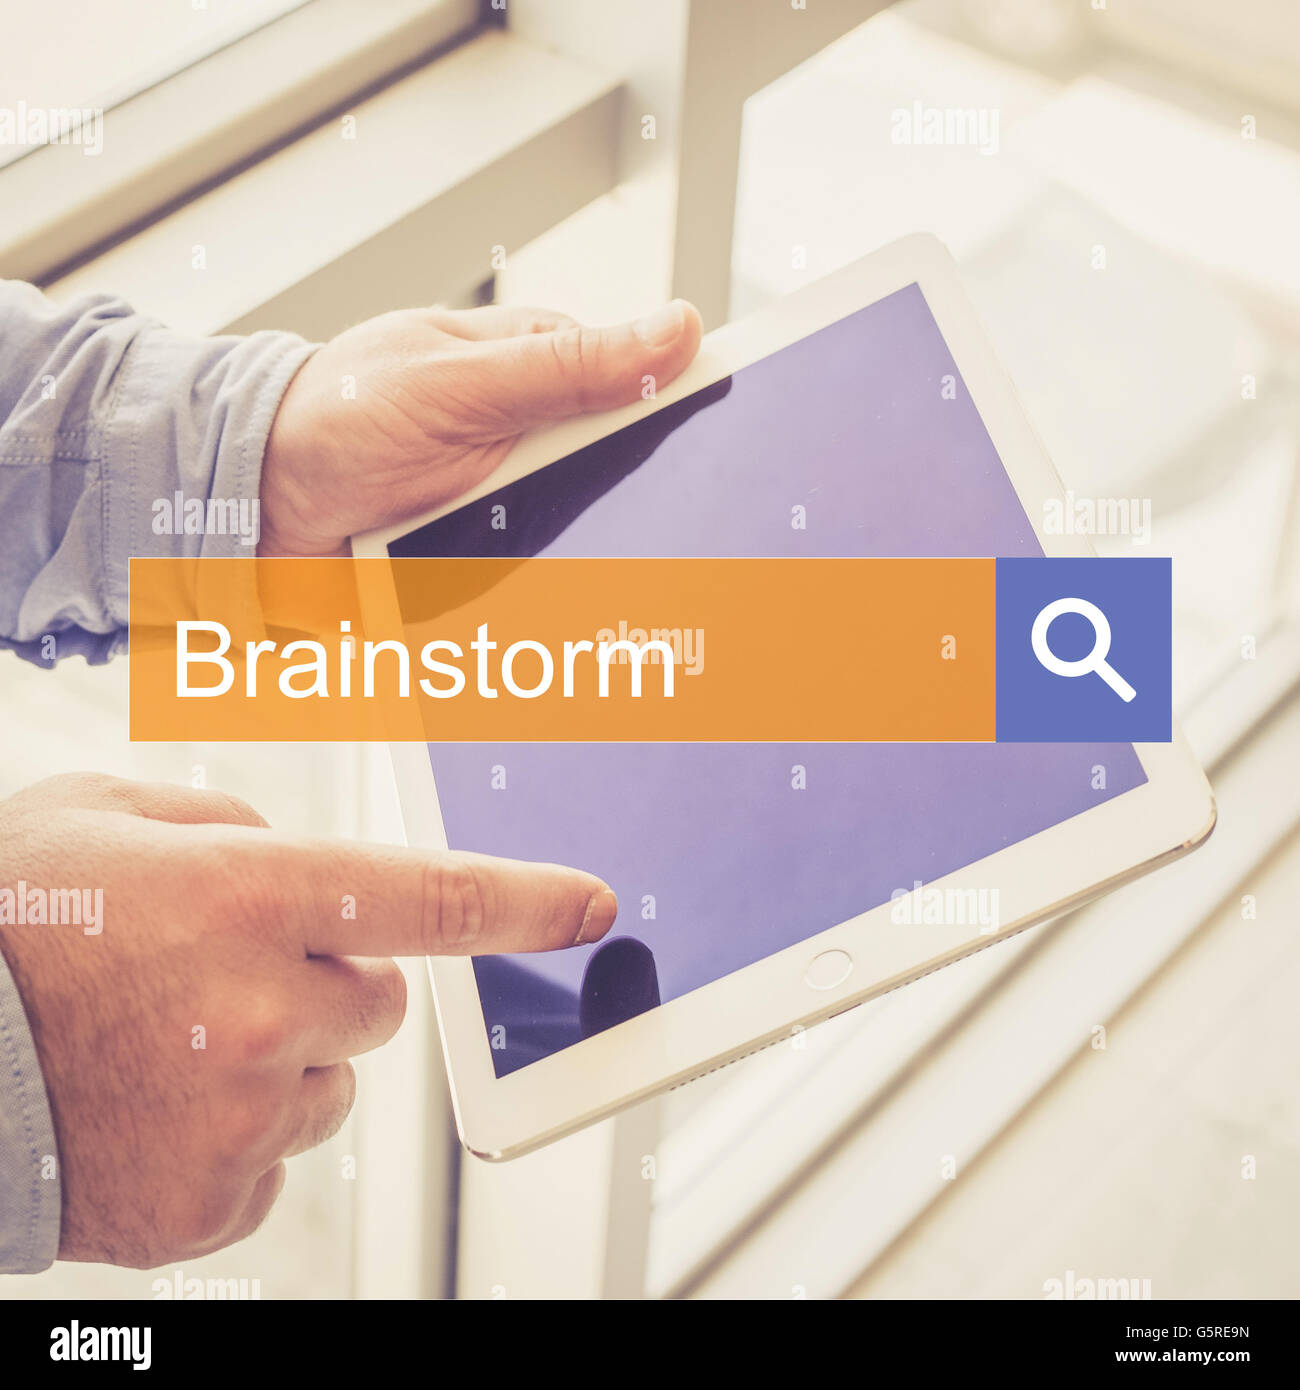 SEARCH TECHNOLOGY COMMUNICATION  Brainstorm TABLET FINDING CONCEPT Stock Photo